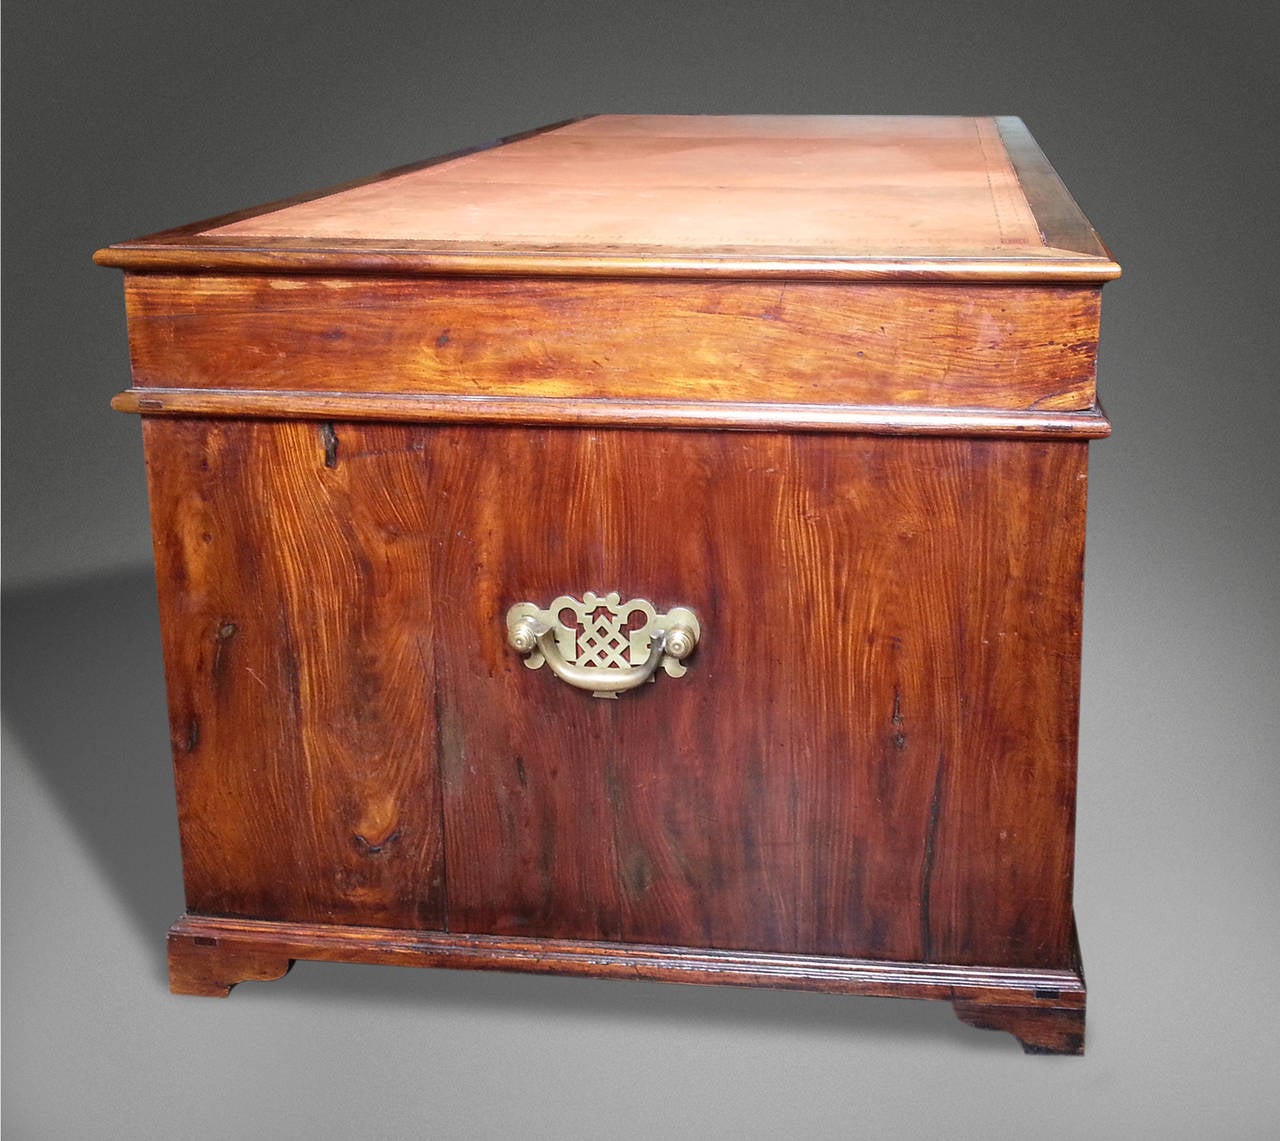 A Very Rare Mid-18th Century Huanghuali Wood Chinese Desk in the English Taste For Sale 1